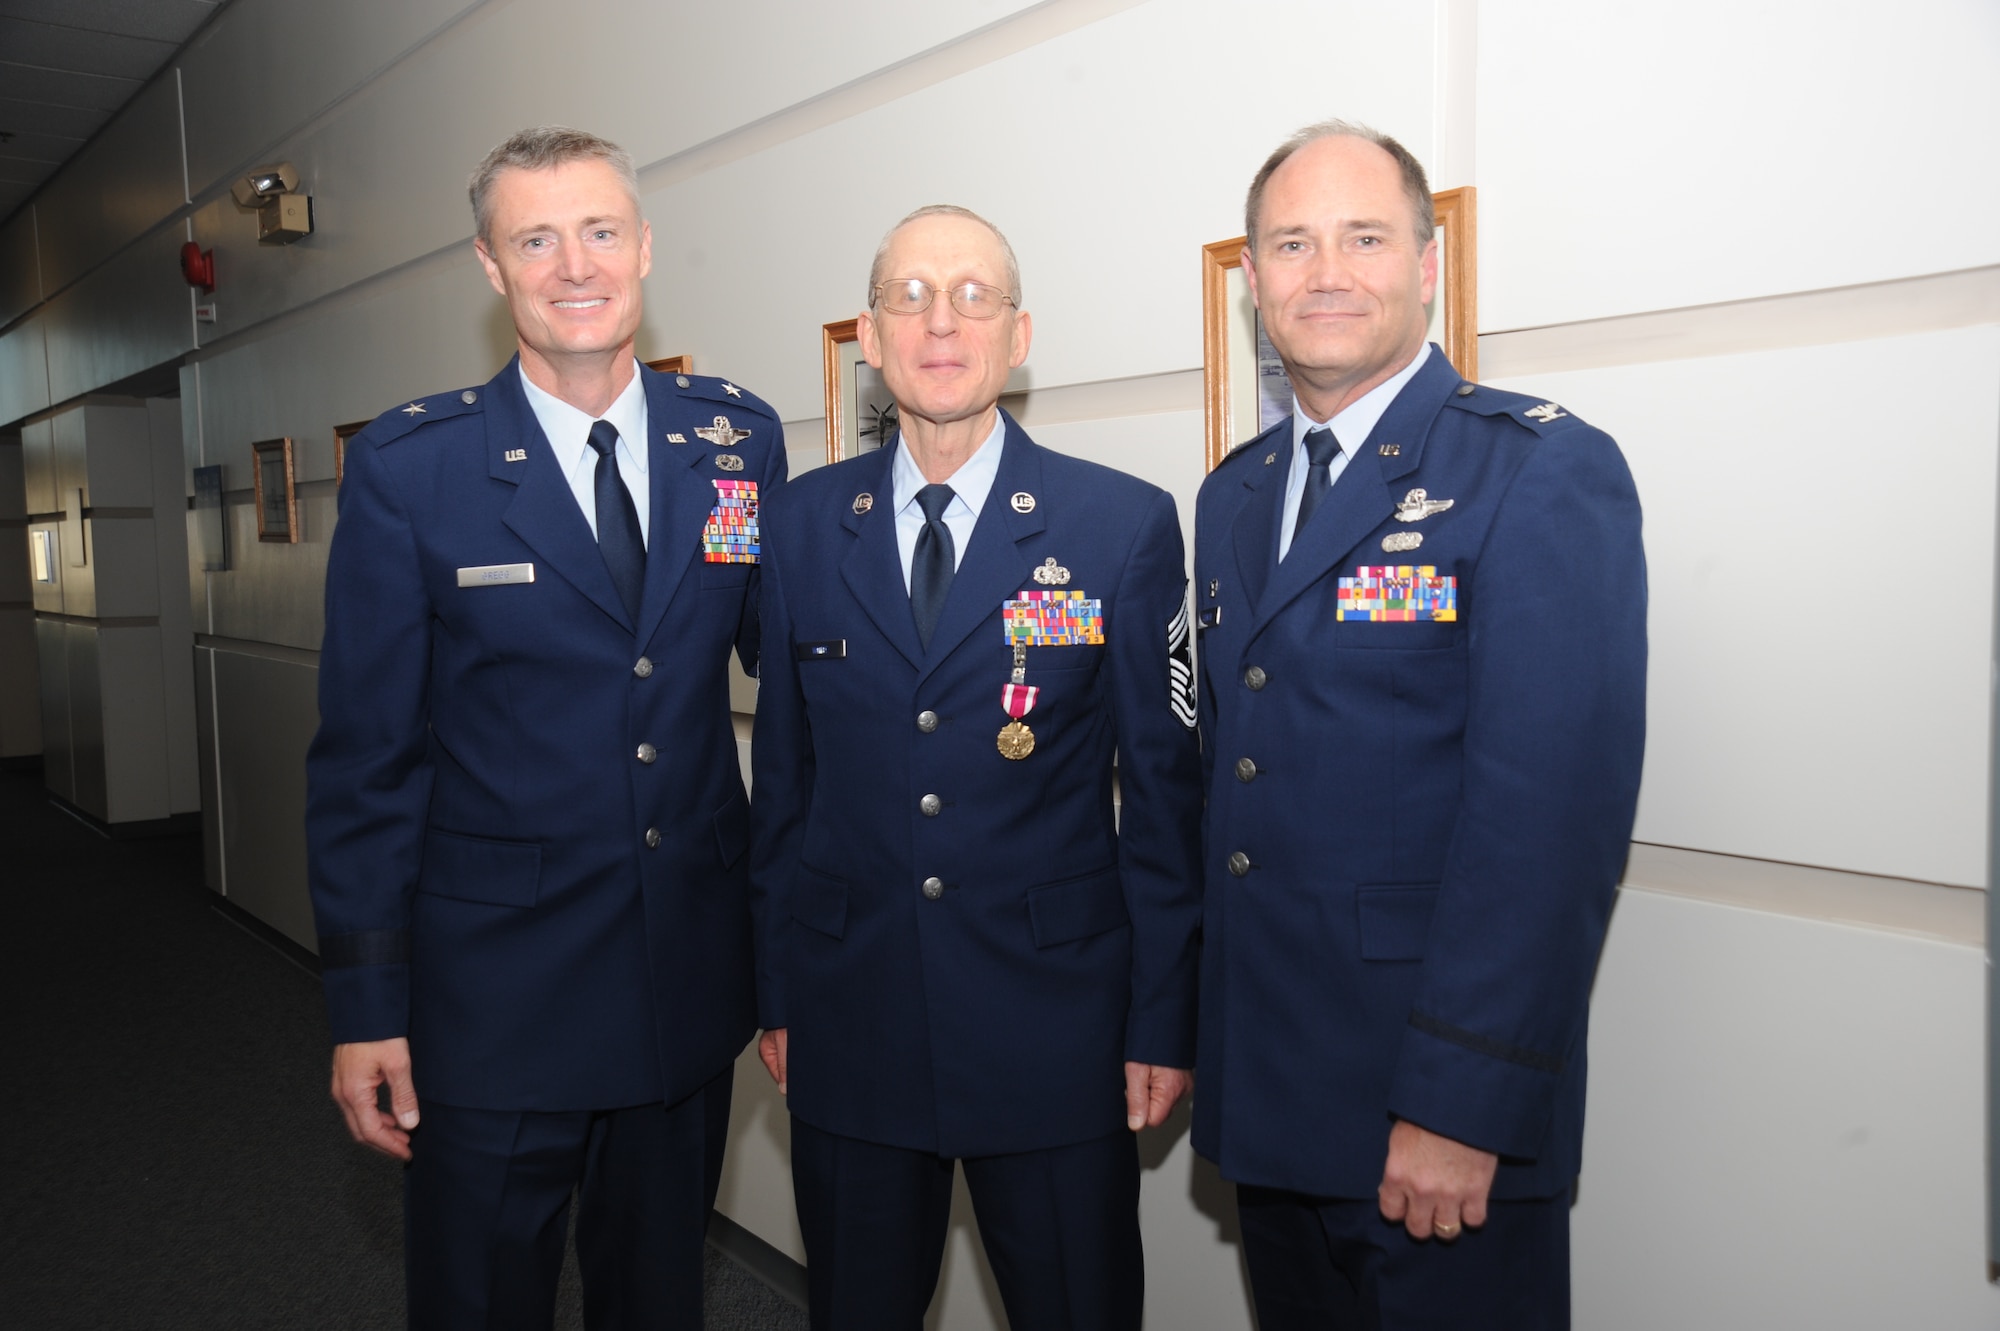 PORTLAND, Ore. - Ore. Air National Guard Commander, Brig. Gen. Steven Gregg; retired 142d Fighter Wing Command Chief, CCMSgt Max White; and 142d Fighter Wing Commander, Col. Stencel pose for a photo after Command Chief Max White was honored in a ceremony to celebrate his retirement on October 16.( Air Force photo by Tech. Sgt John Hughel)